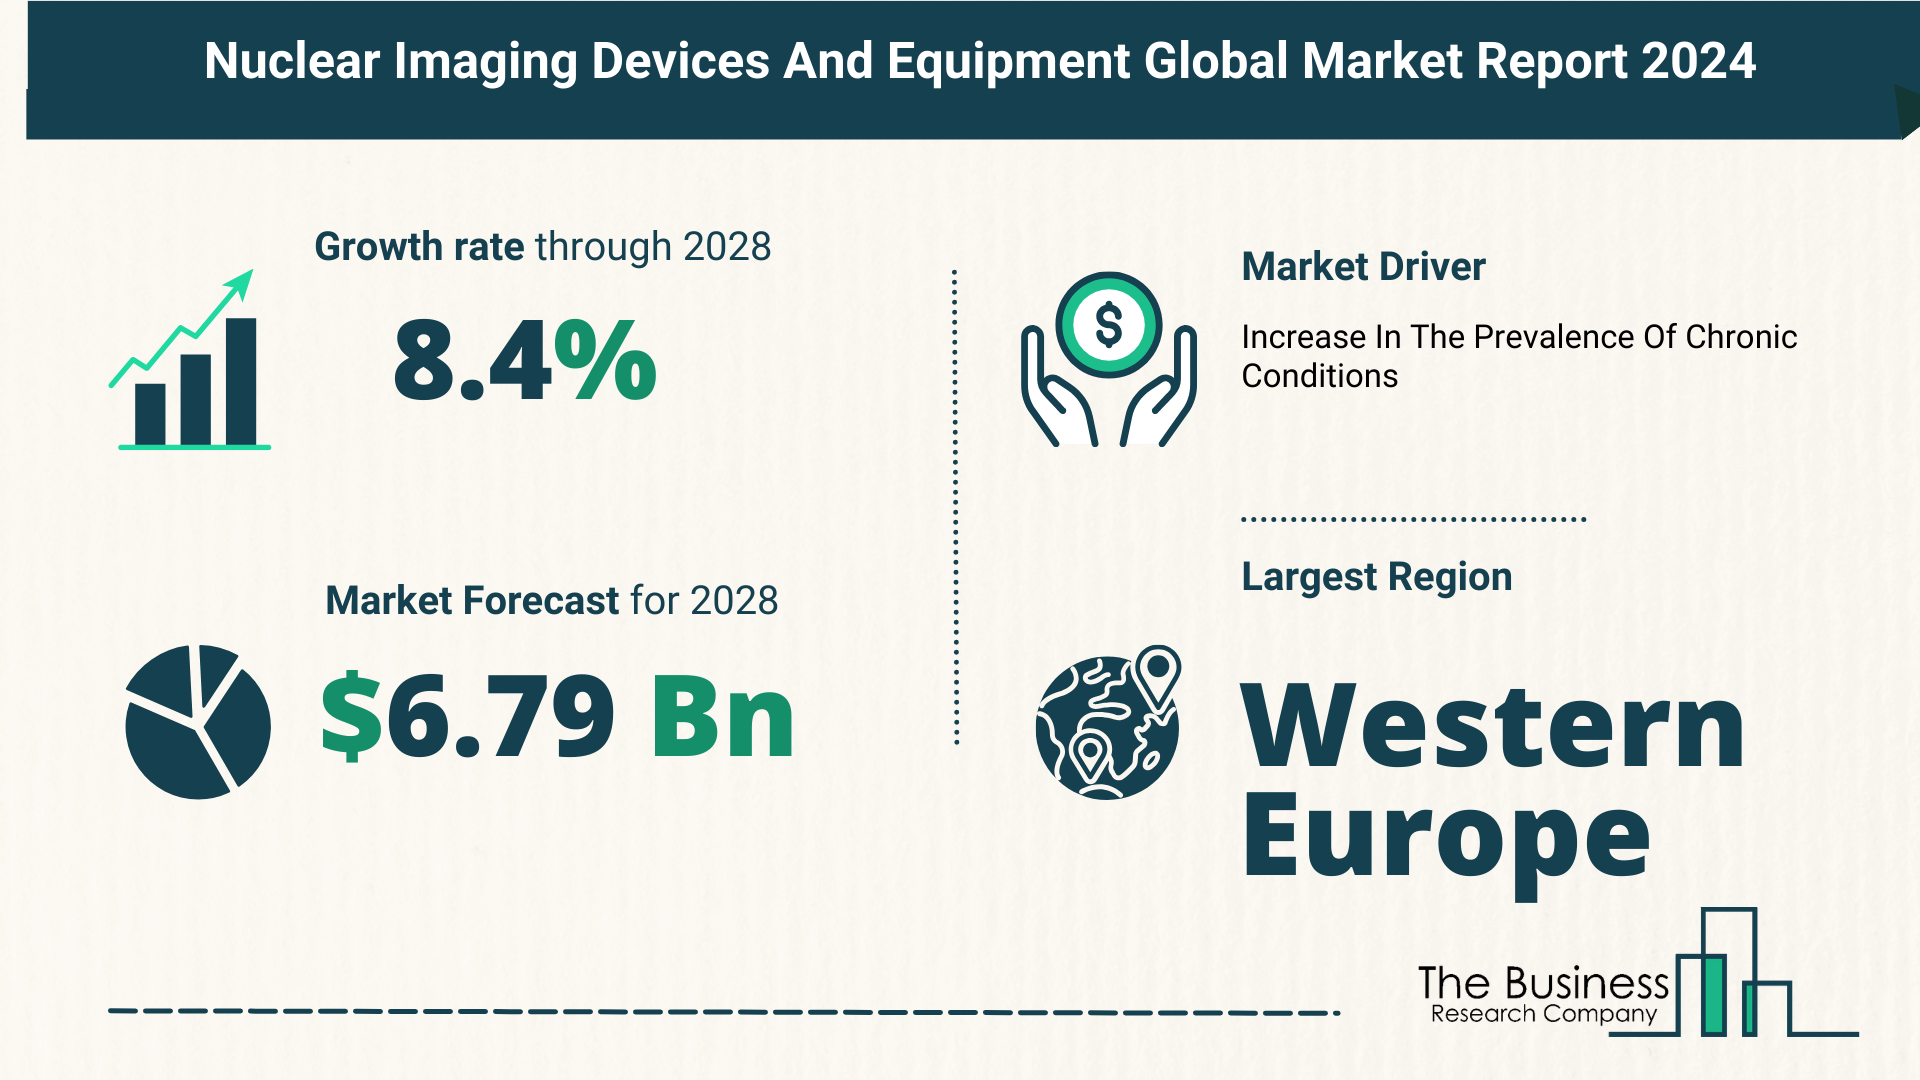 Key Trends And Drivers In The Nuclear Imaging Devices And Equipment Market 2024